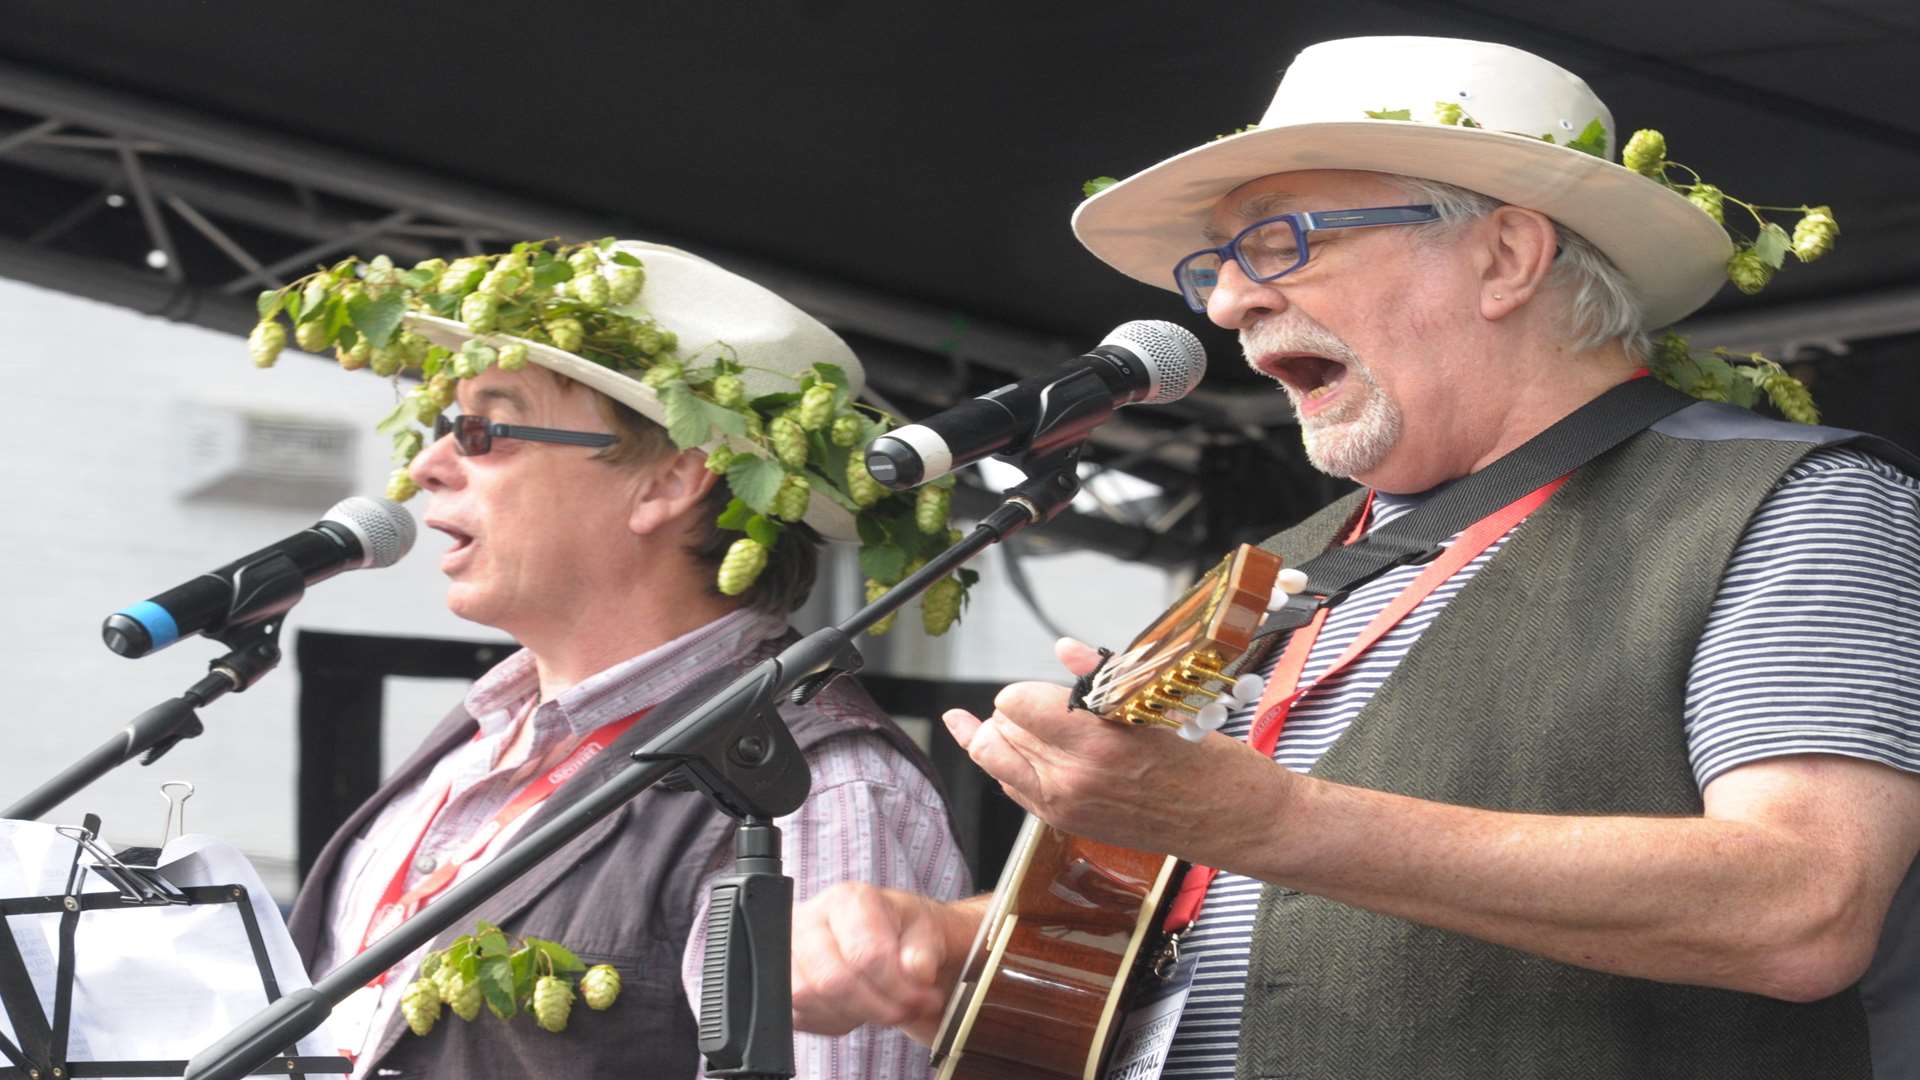 One of the acts at the 2016 Faversham Hop Festival